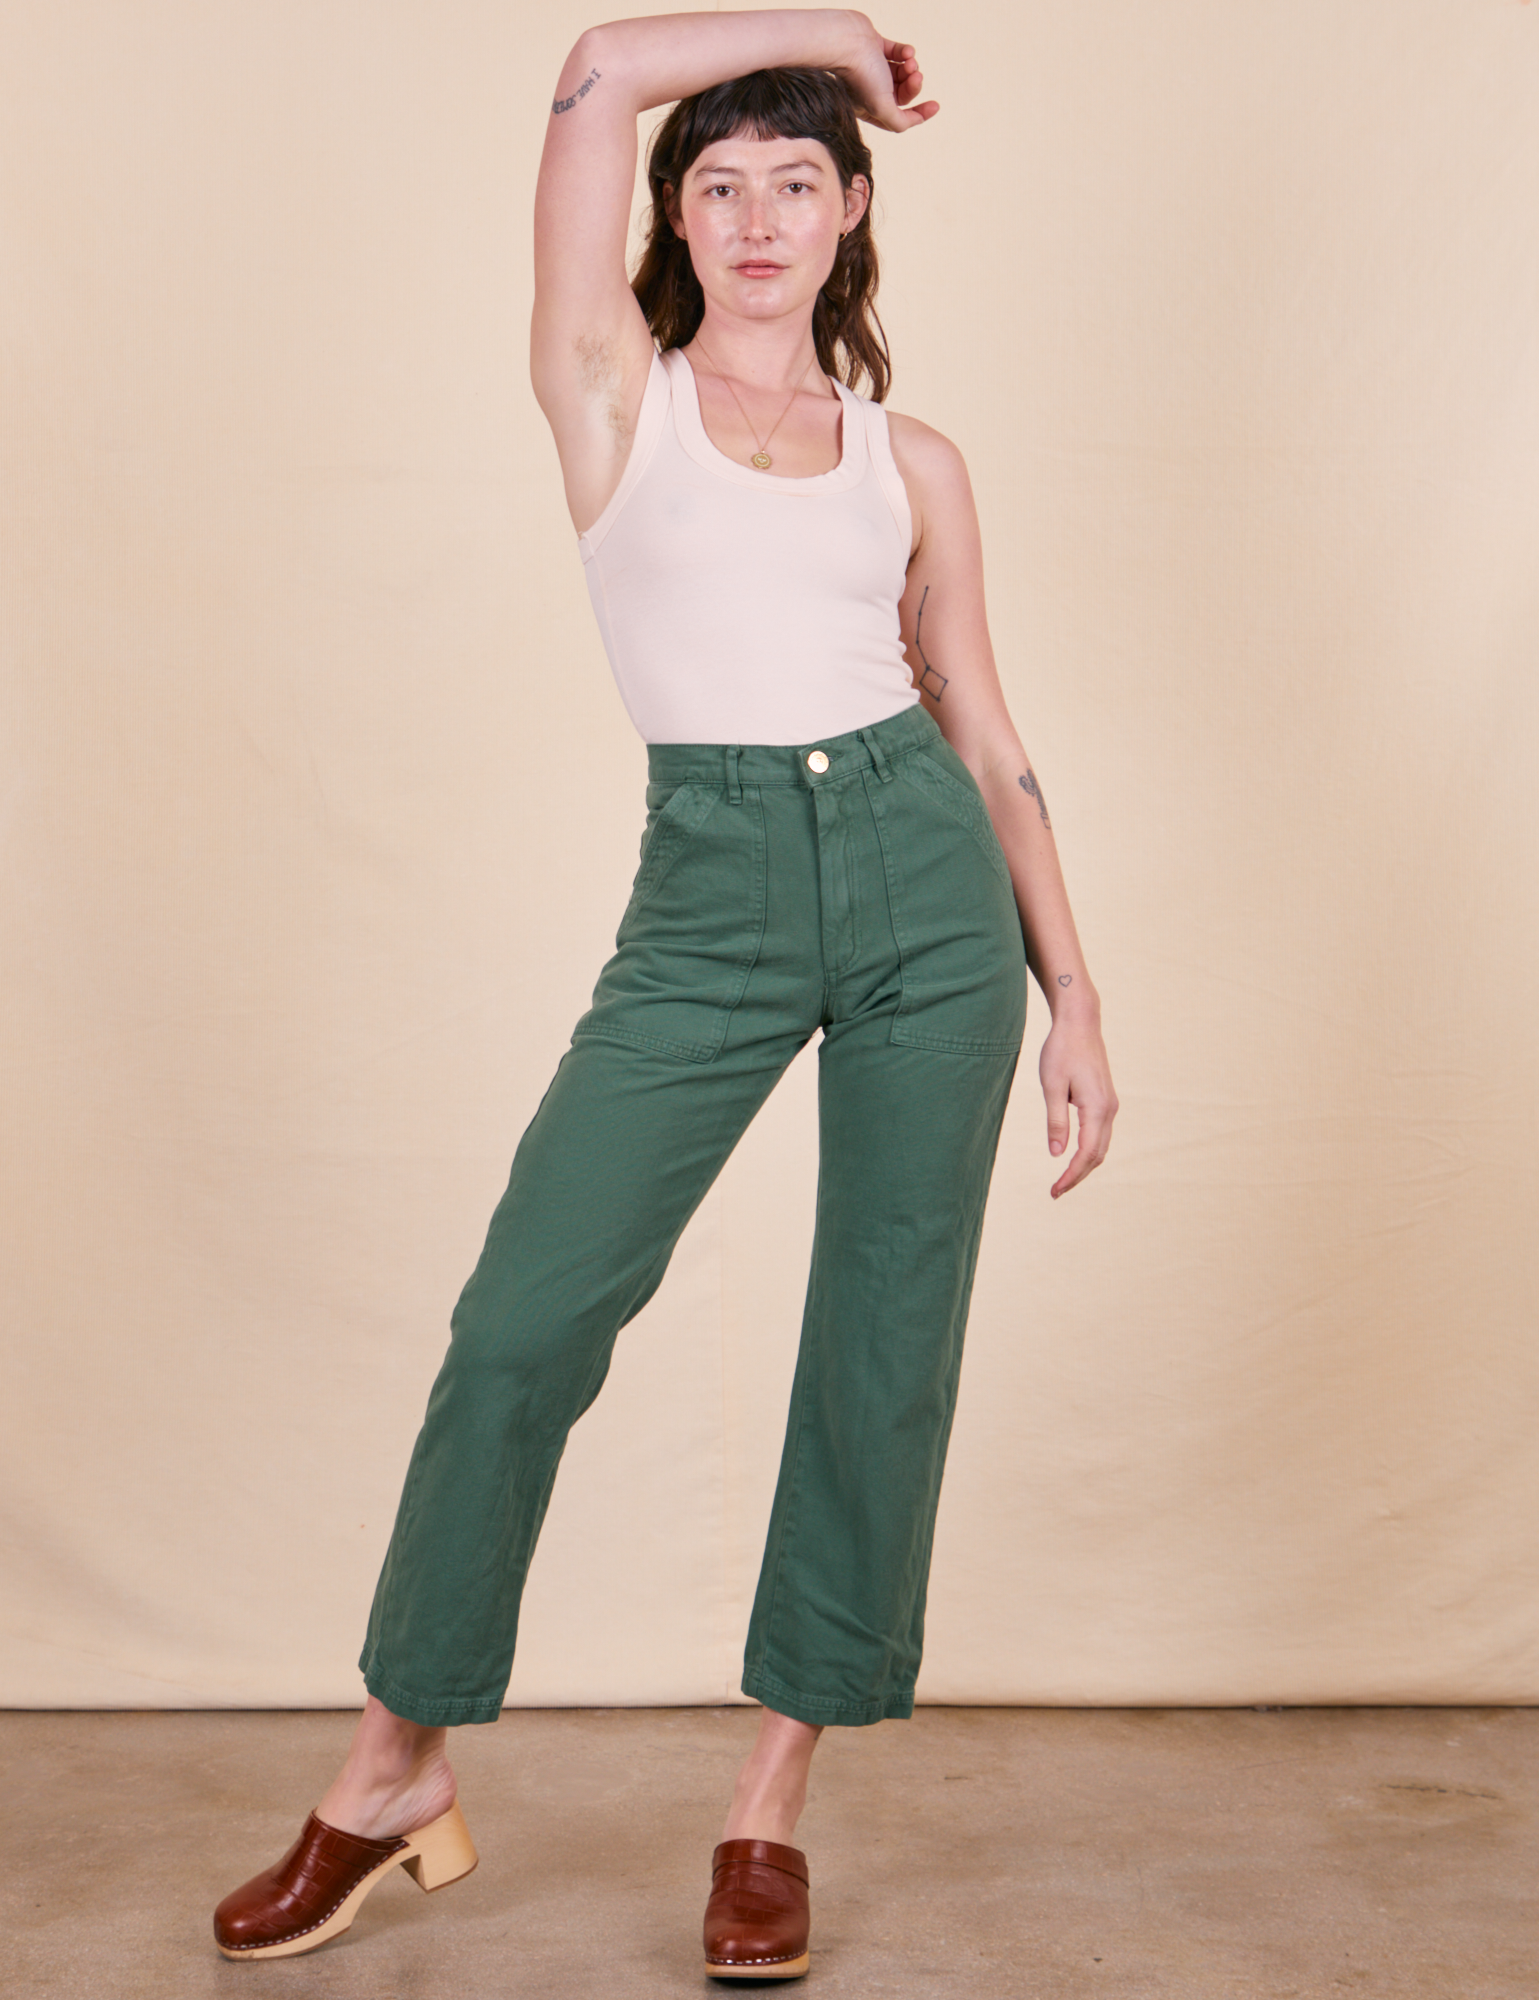 Alex is 5&#39;8&quot; and wearing XS Work Pants in Dark Emerald Green paired with vintage off-white Tank Top